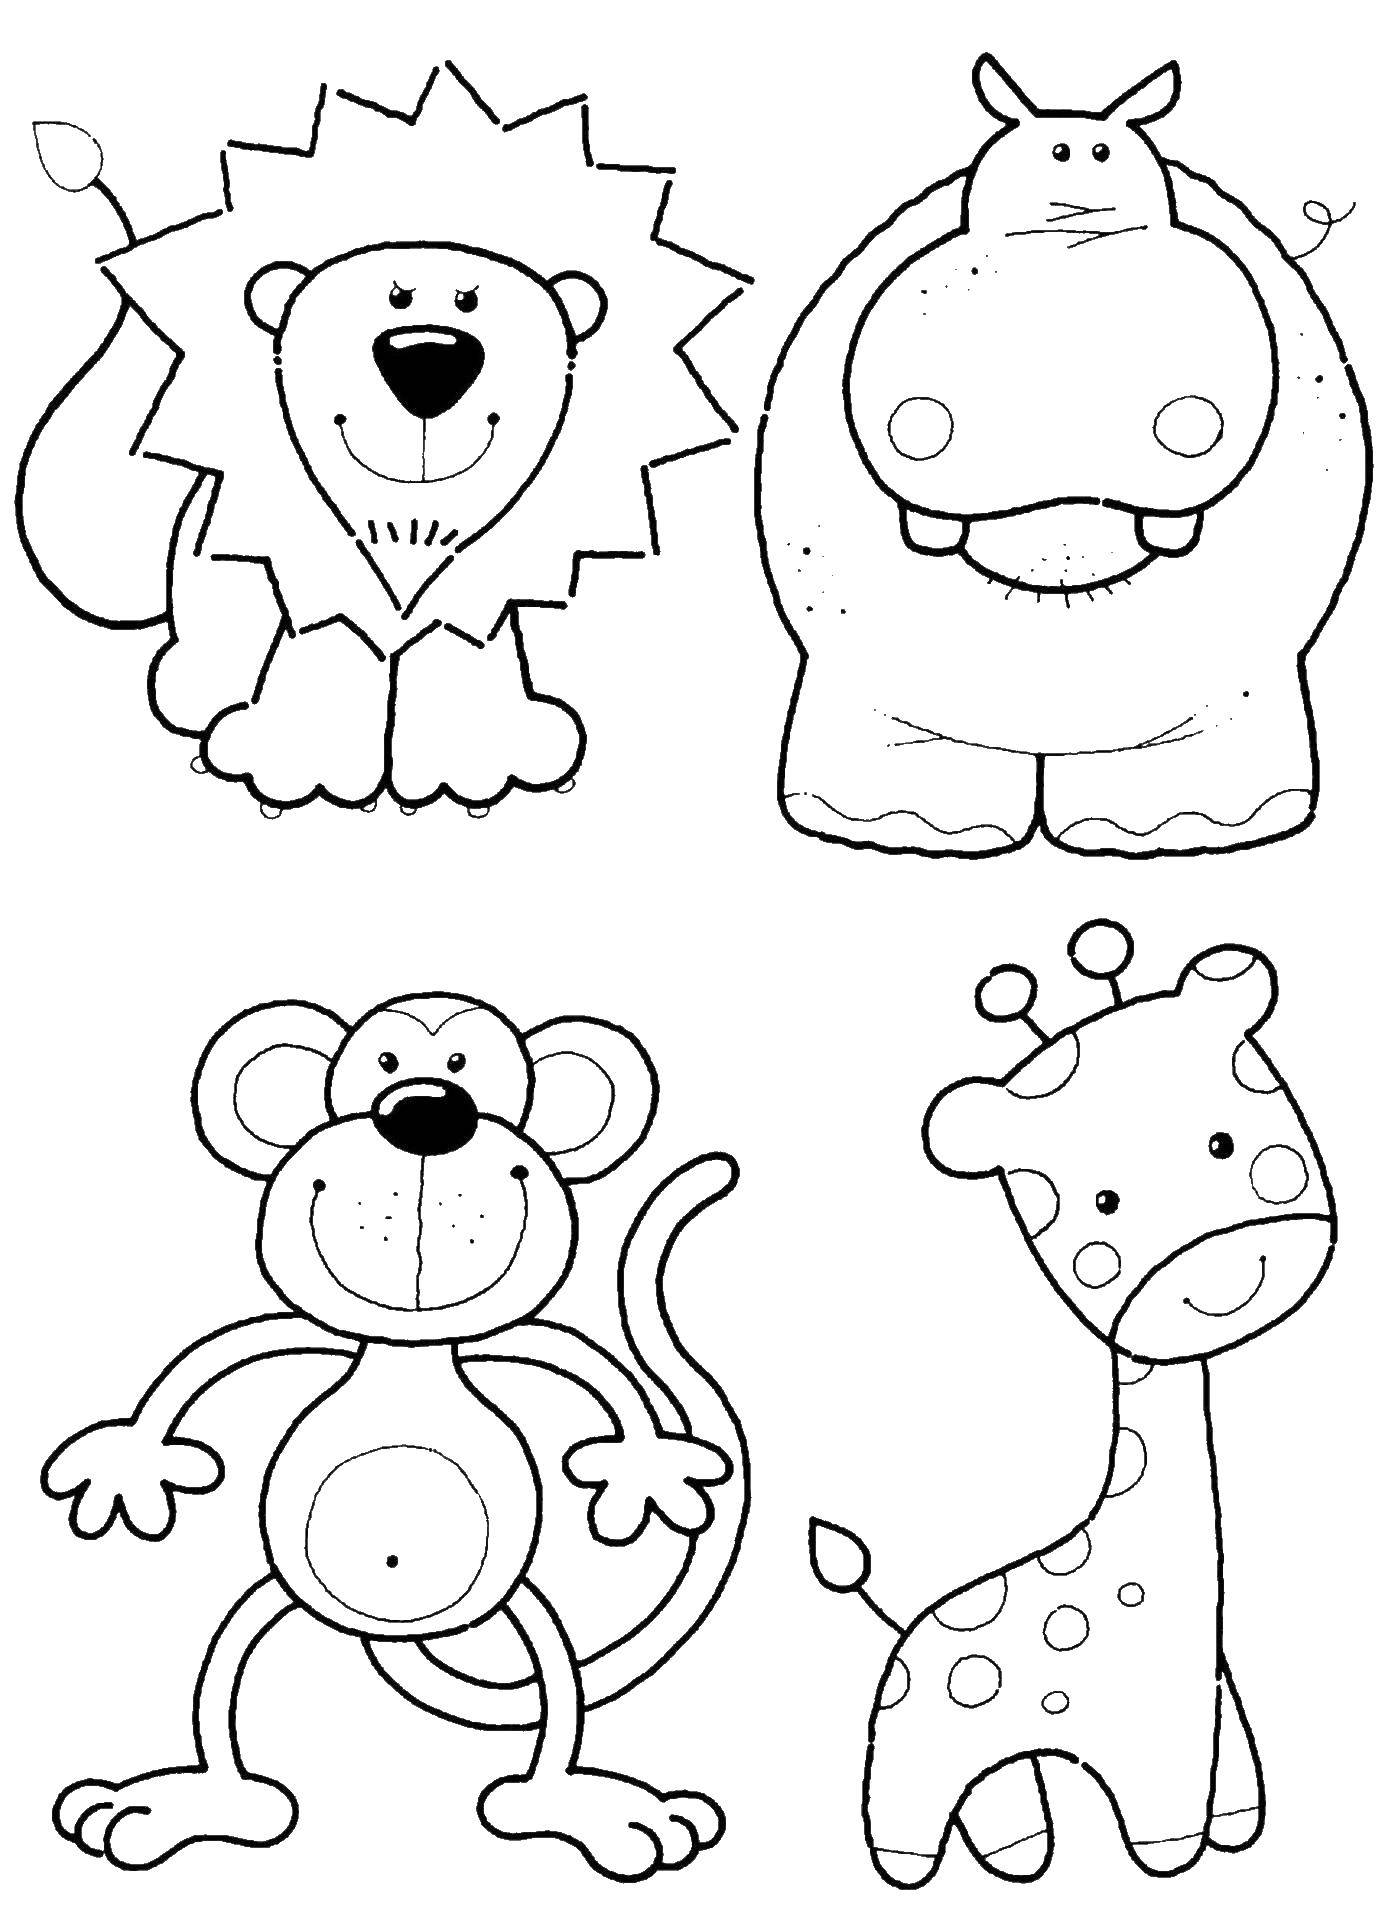 Coloring Animals: lion, Hippo, monkey, giraffe. Category coloring for little ones. Tags:  animals, lion, Hippo, monkey, giraffe.